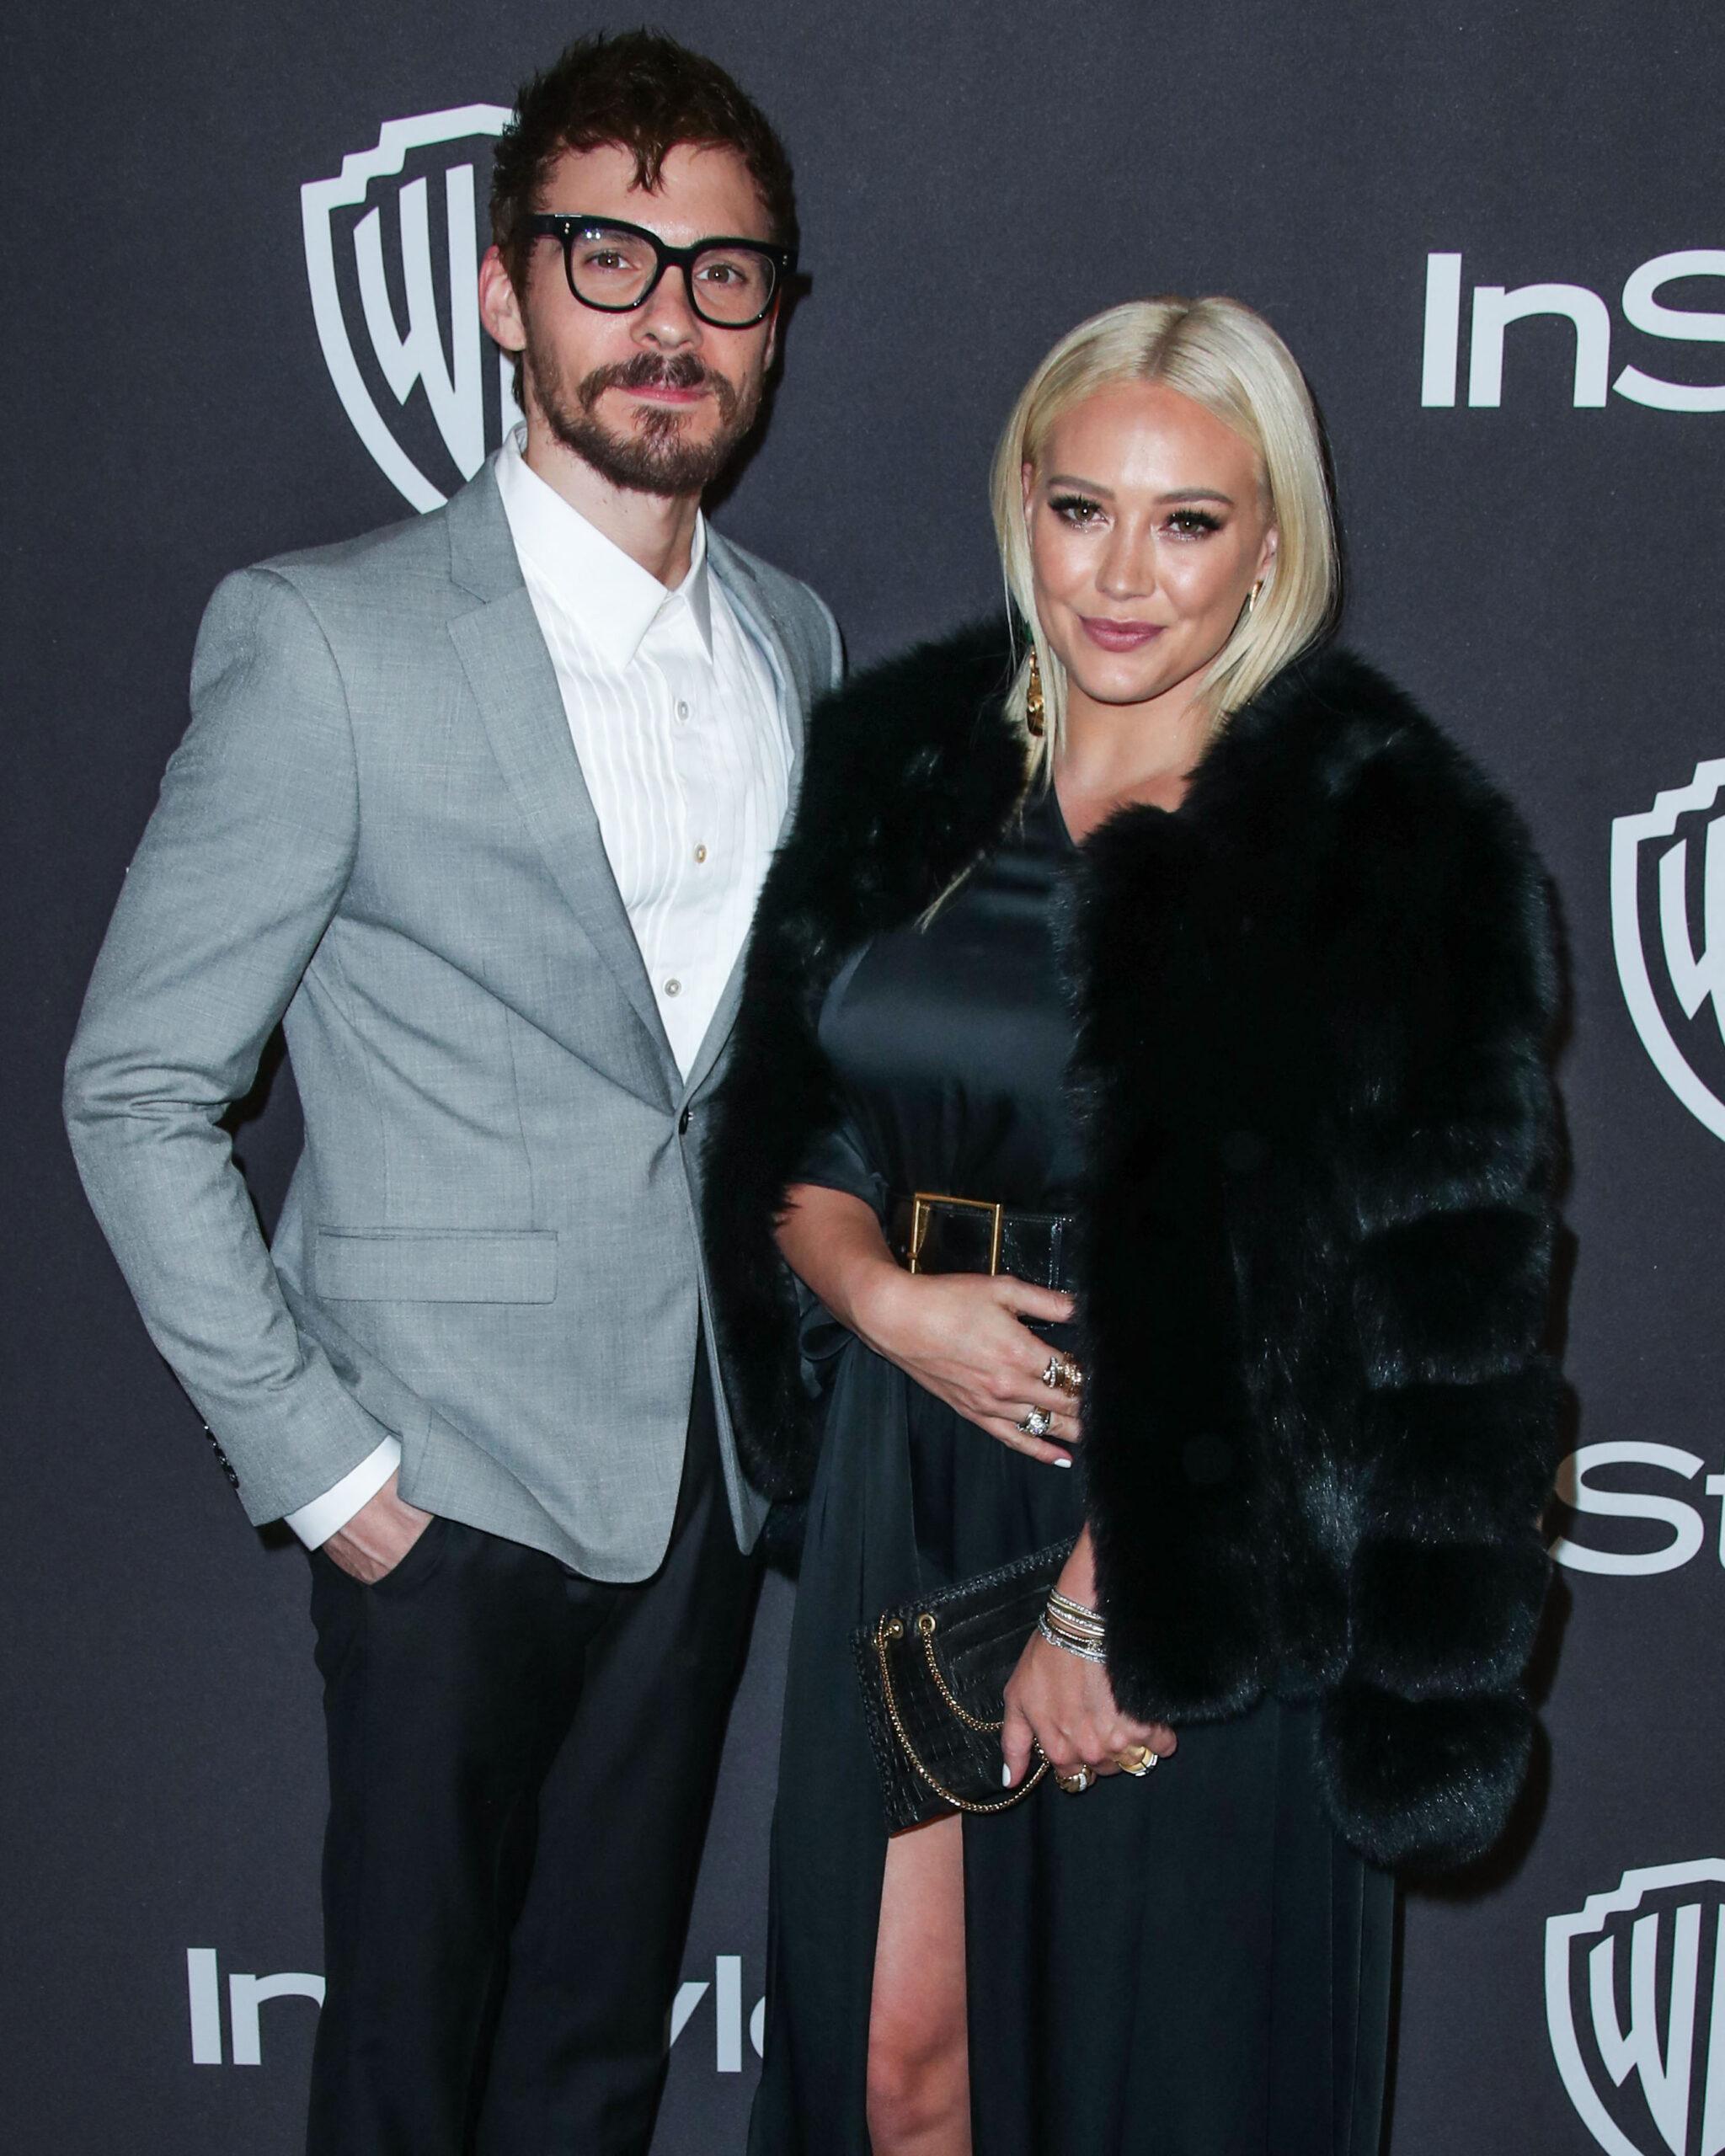 Hilary Duff & Matthew Koma at the 2019 InStyle And Warner Bros. Pictures Golden Globe Awards After Party held at The Beverly Hilton Hotel on January 6, 2019 in Beverly Hills, Los Angeles, California